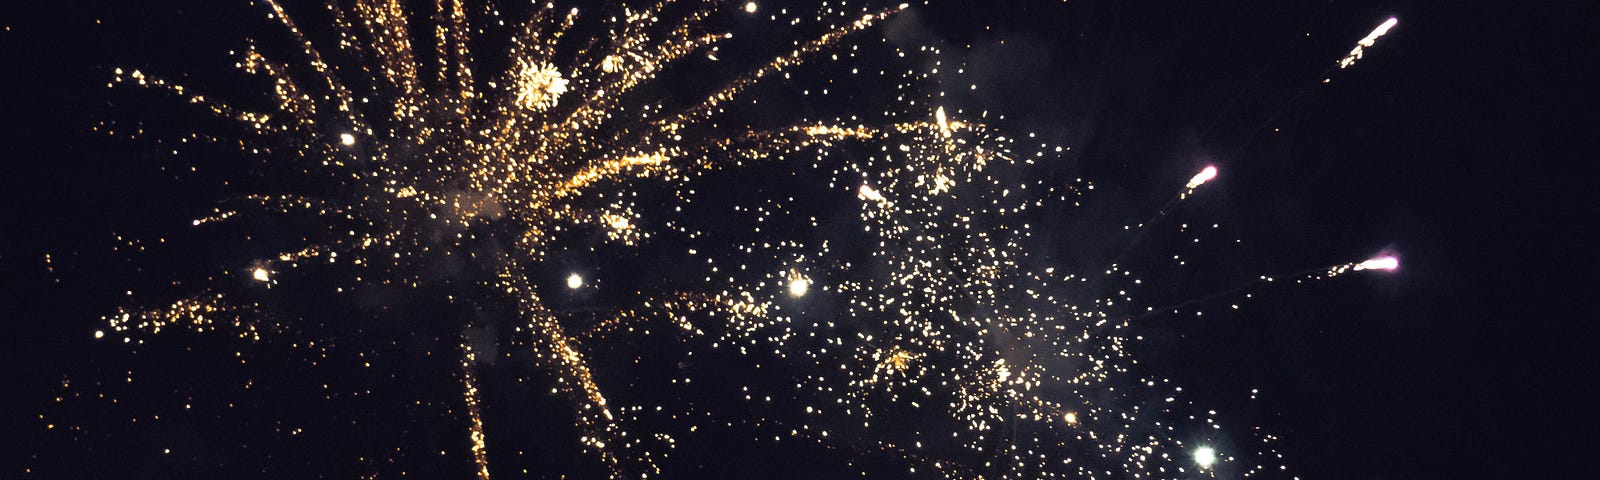 fireworks exploding in a night sky